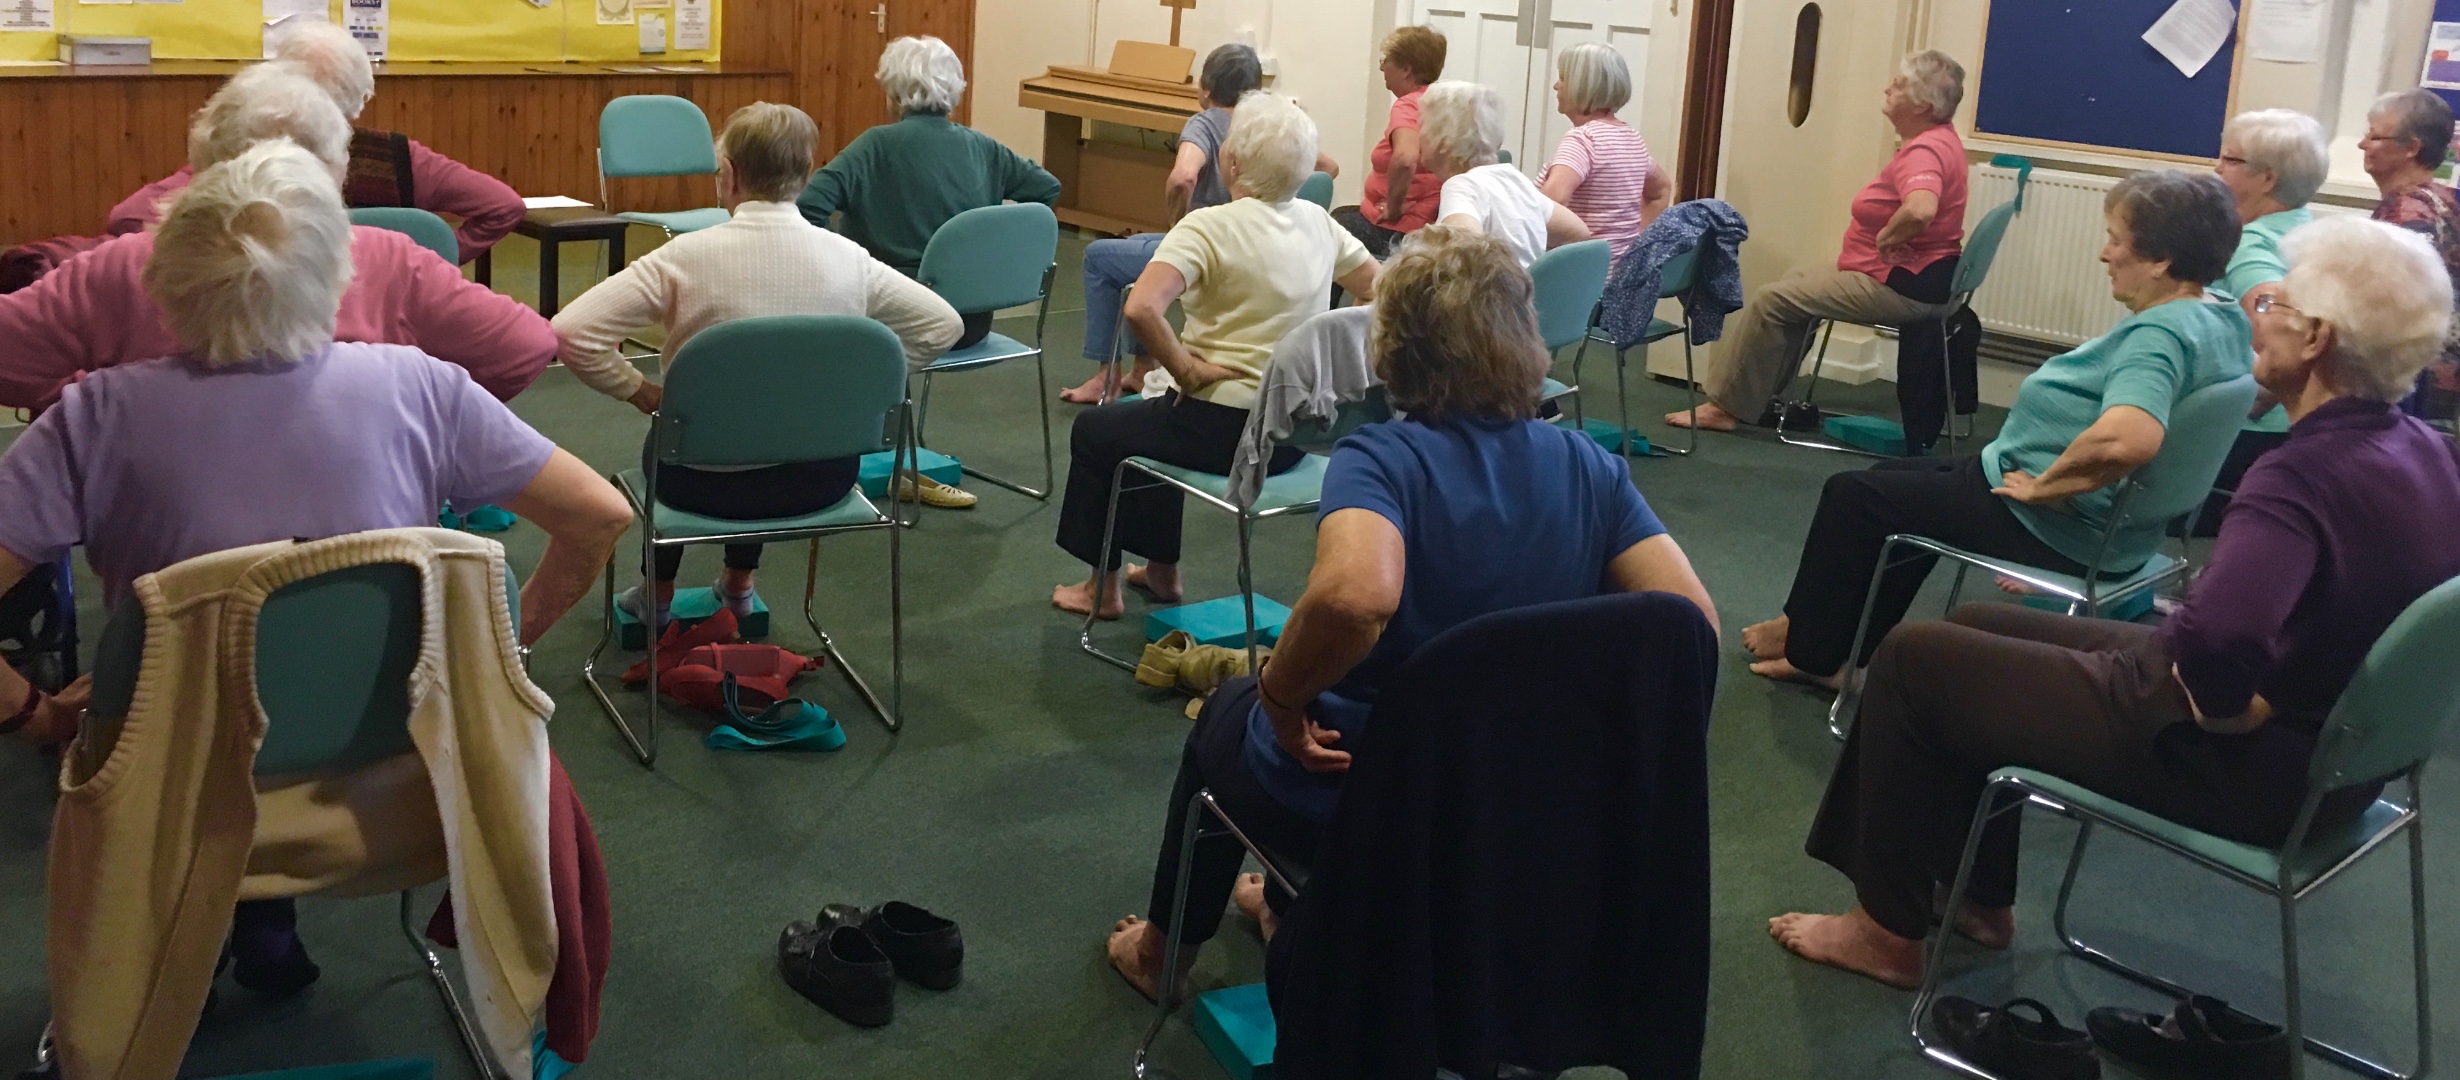 Senior Citizens participating in an exercise class seated in chairs